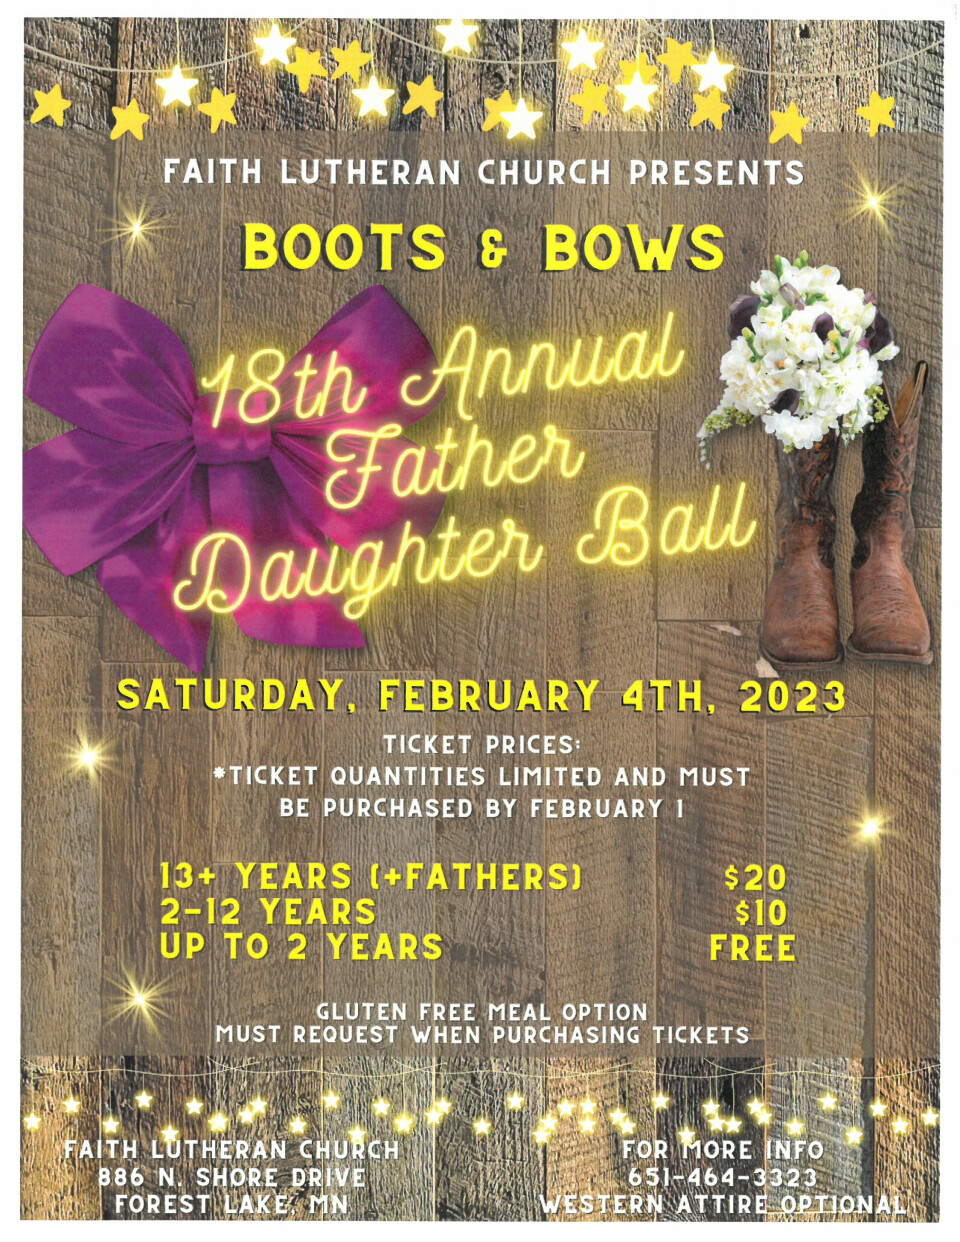 5 pm Father Daughter Ball